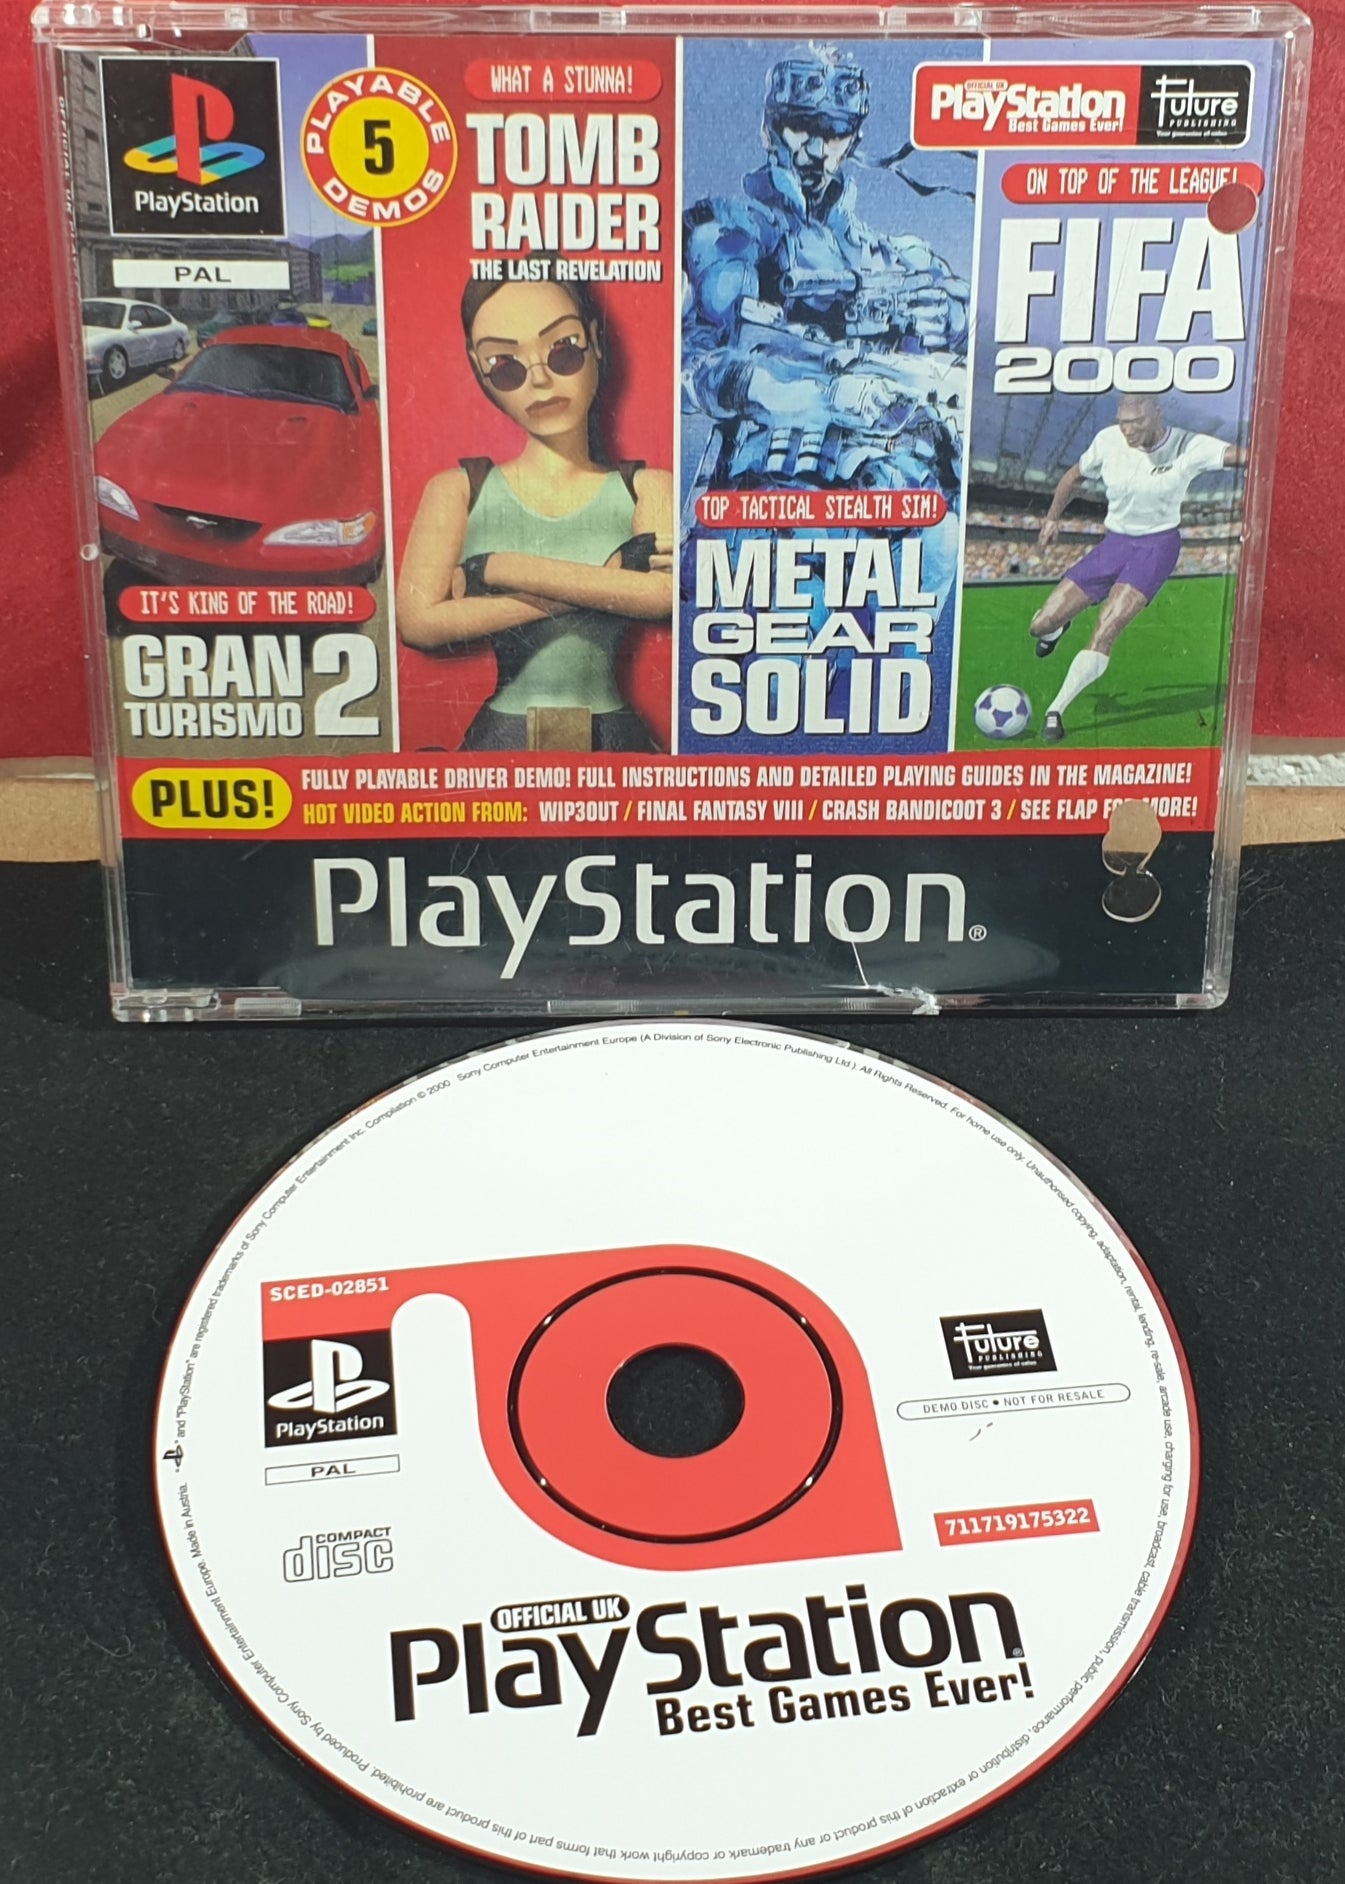 Sony Playstation 1 (PS1) Magazine Best Games Ever Demo Disc RARE